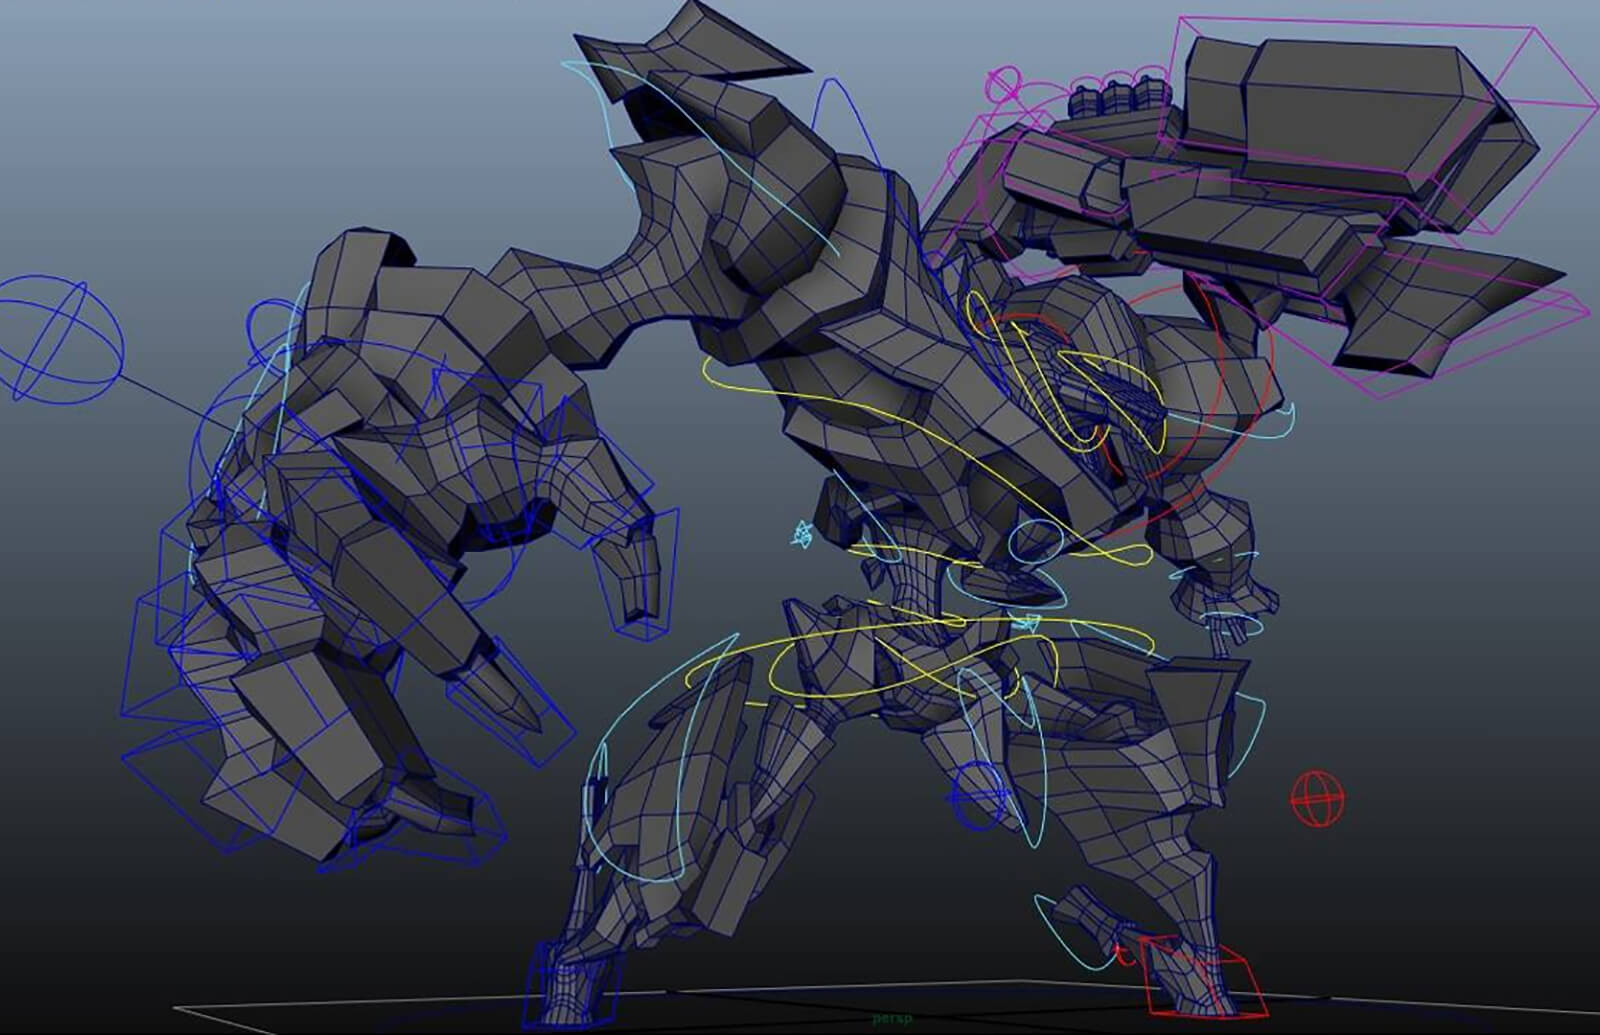 Wireframe of a 3D model of a robot with a large claw and shoulder-mounted cannon